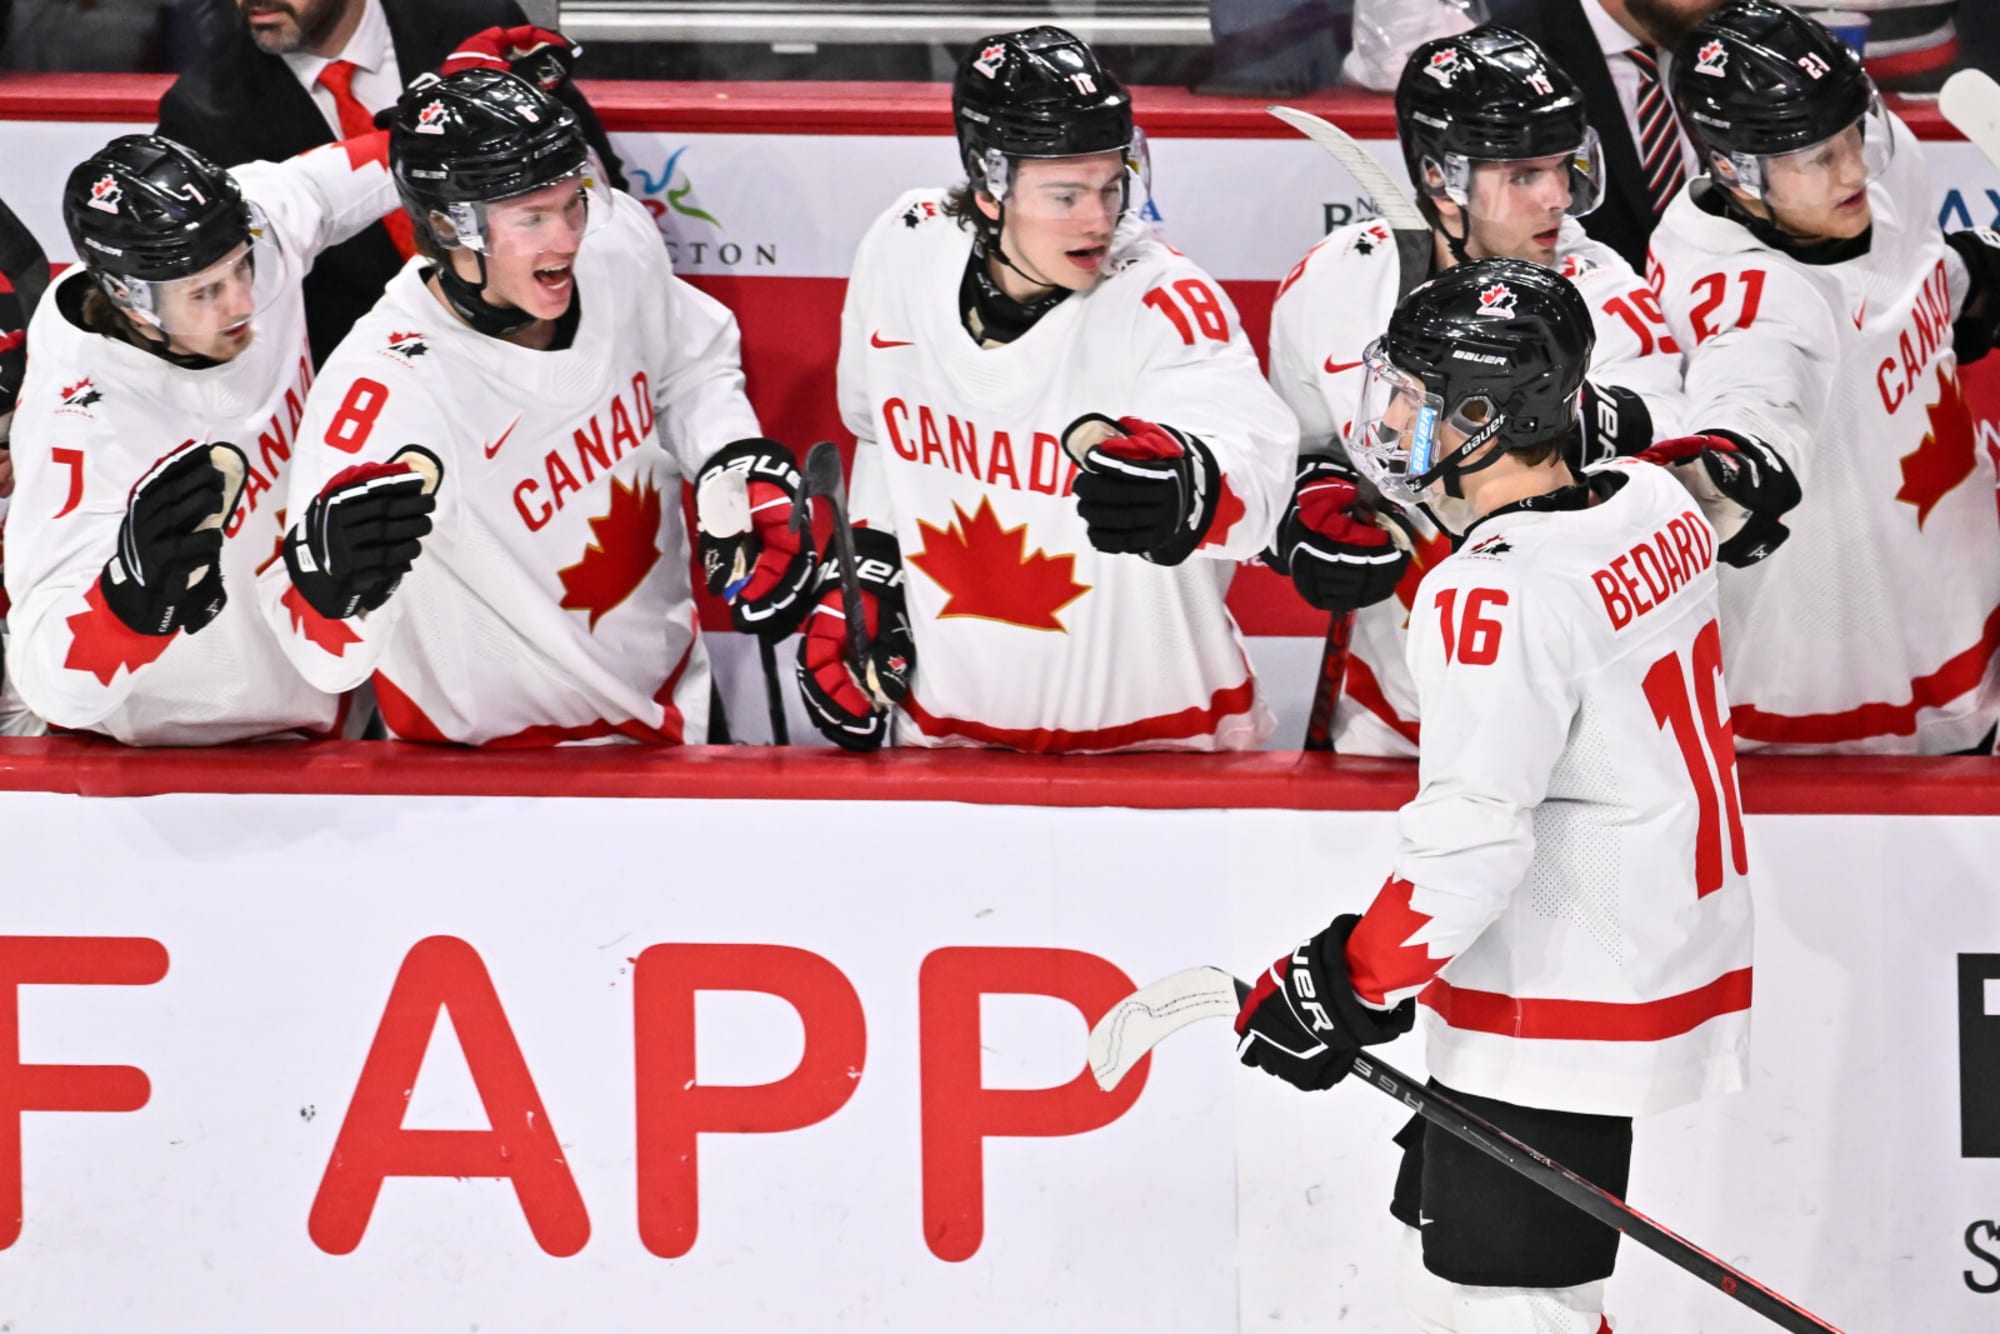 The 2023 World Juniors Gold Medal Game Is Officially Set